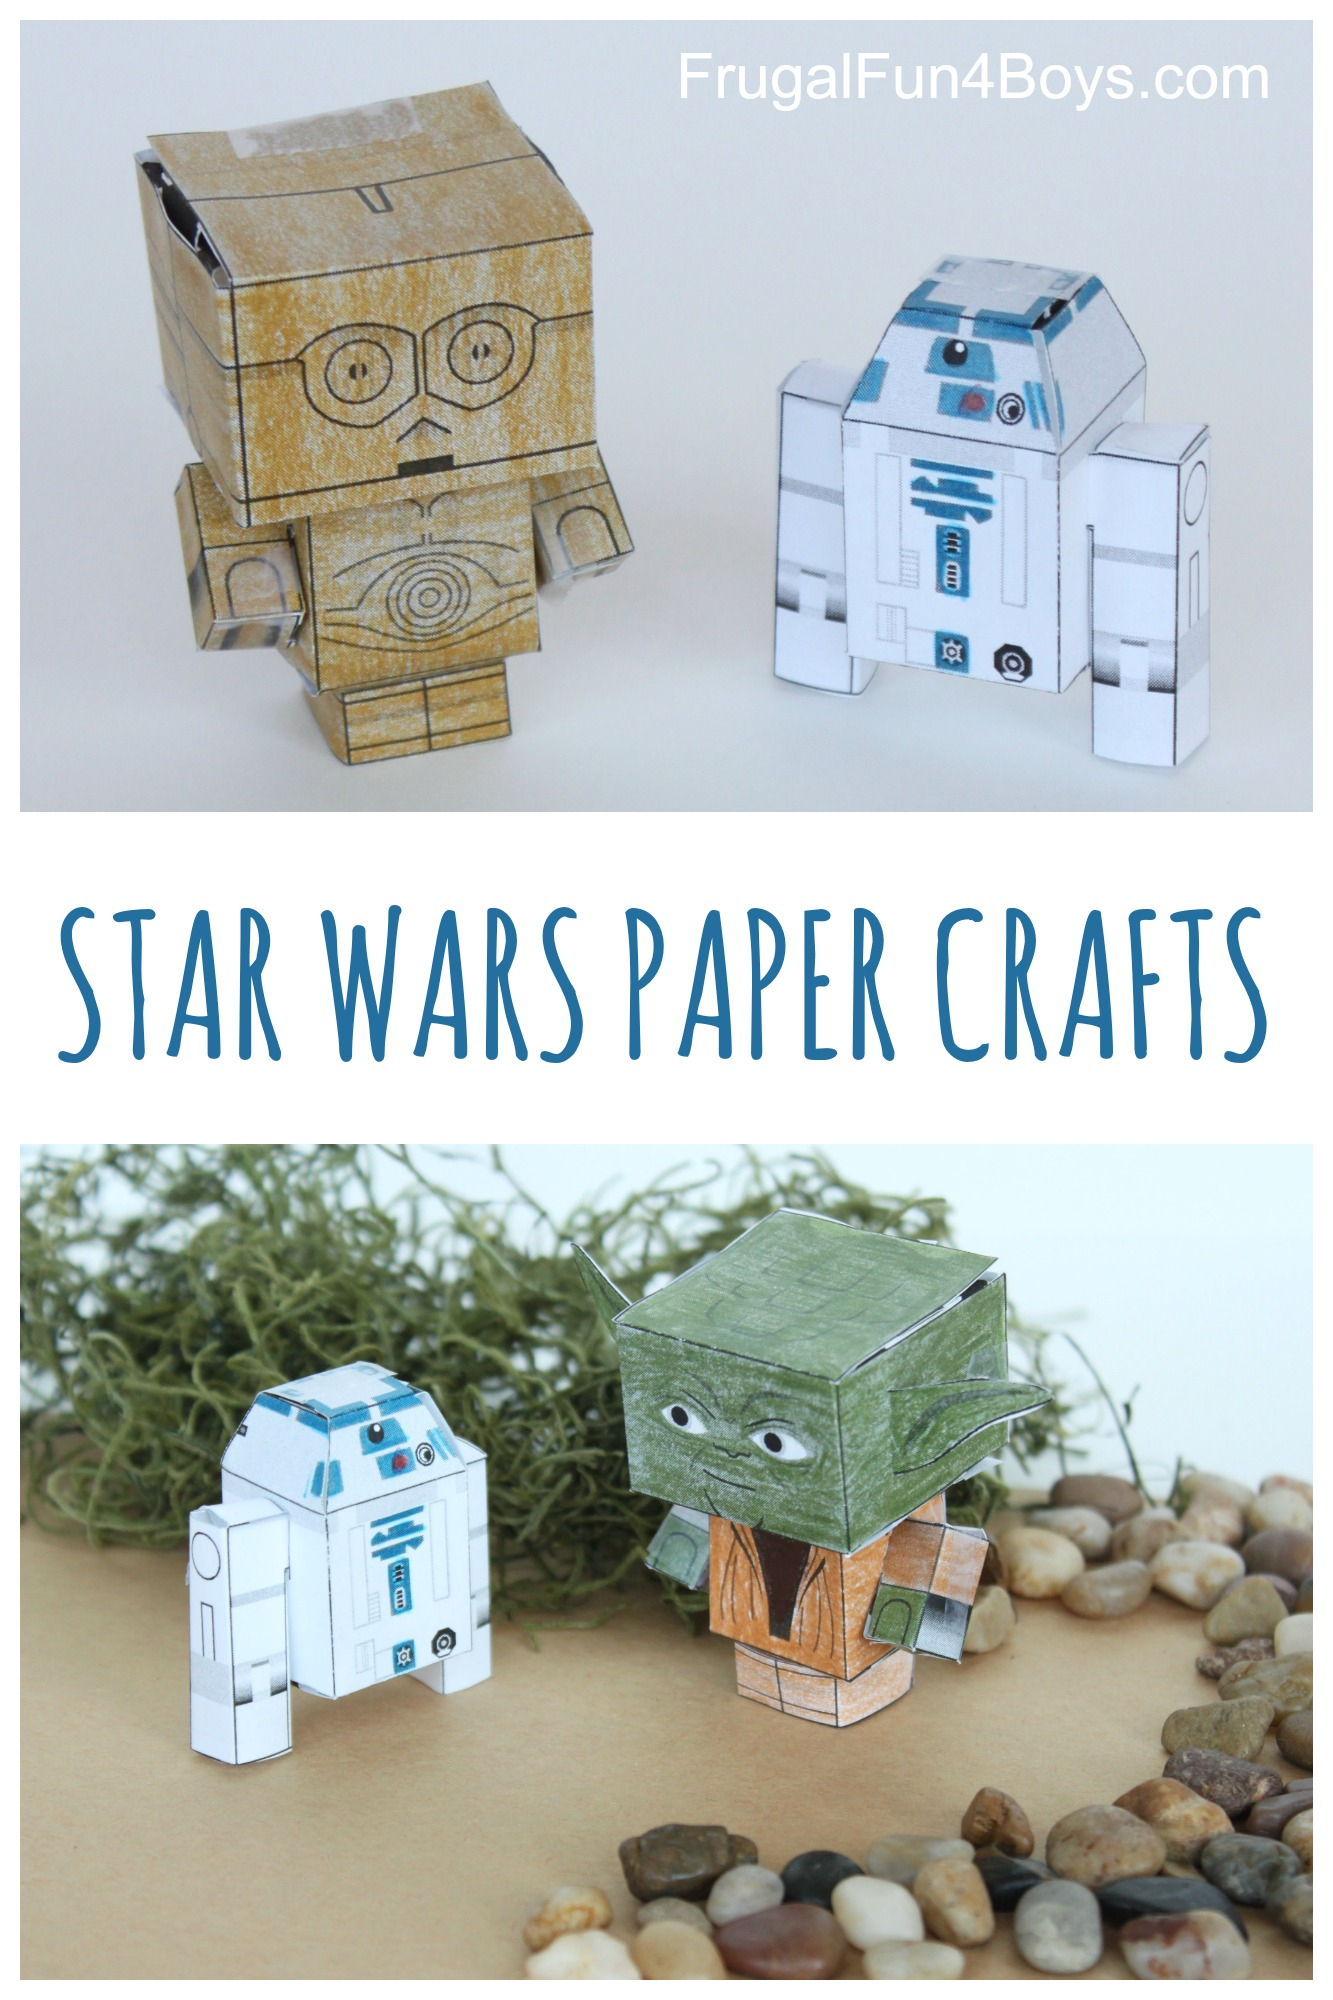 How To Fold Origami Anakin Skywalker Star Wars Paper Crafts To Make Frugal Fun For Boys And Girls